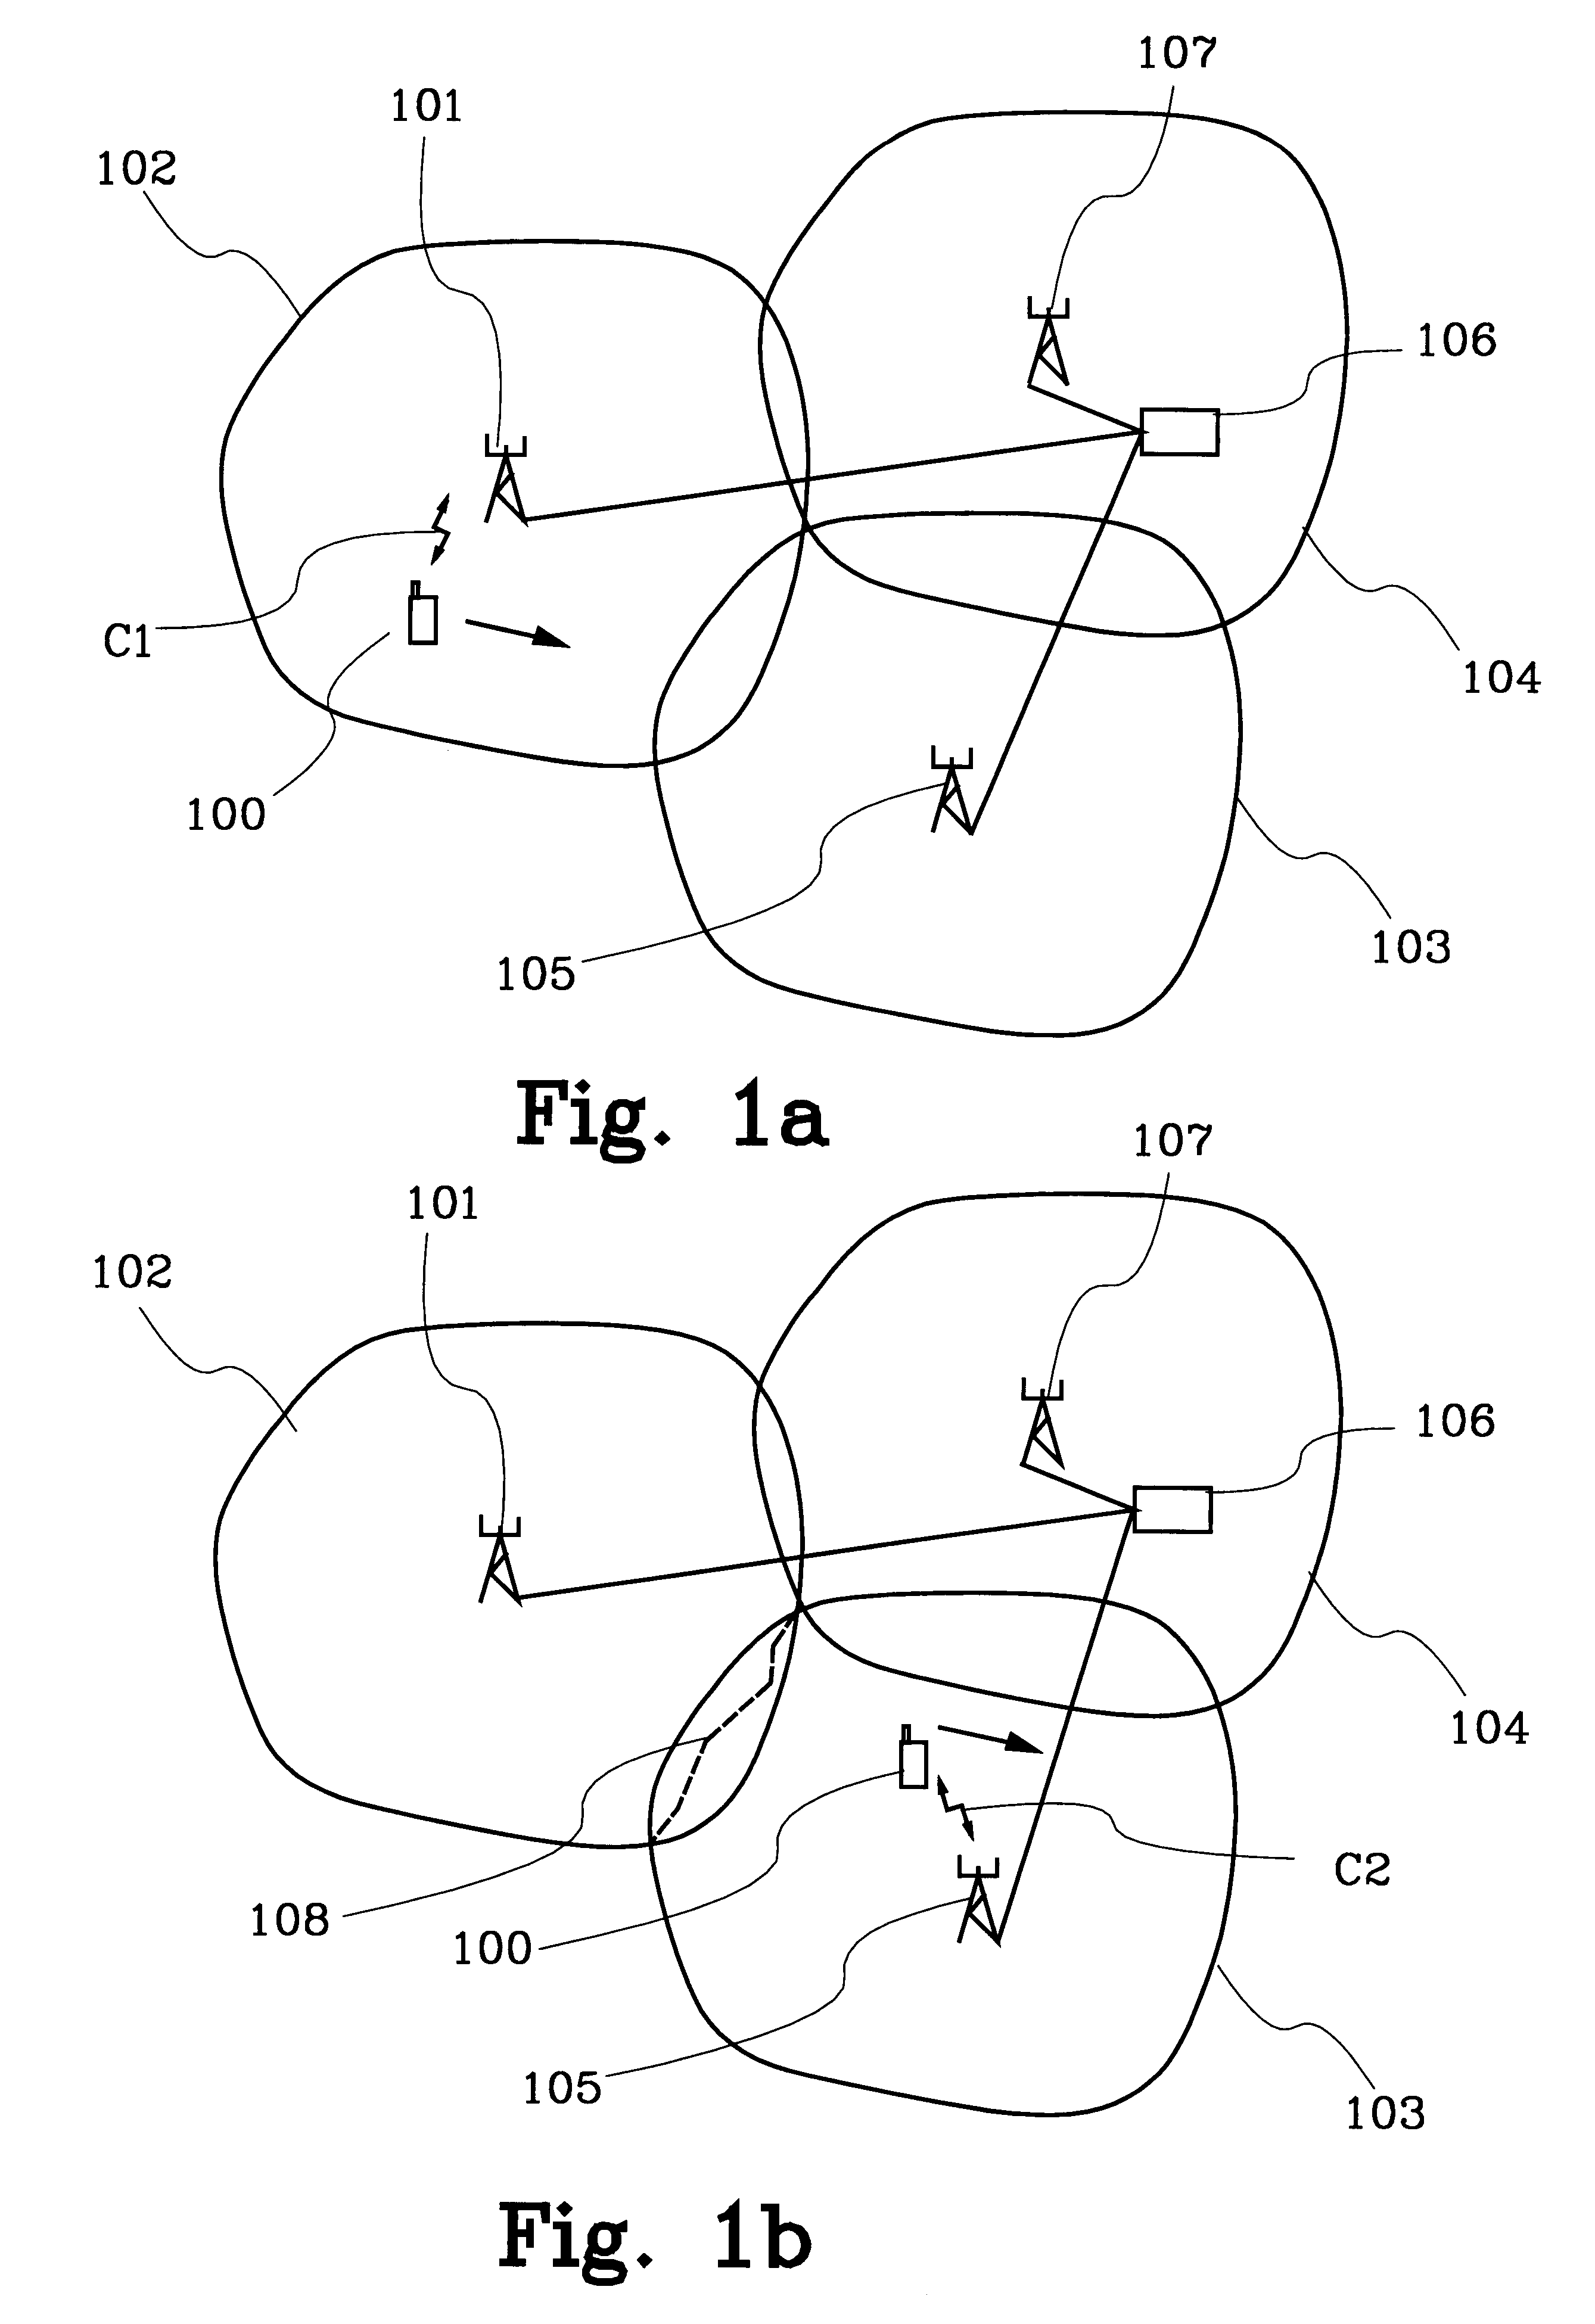 Method and means for determining a handover in a radio communication system